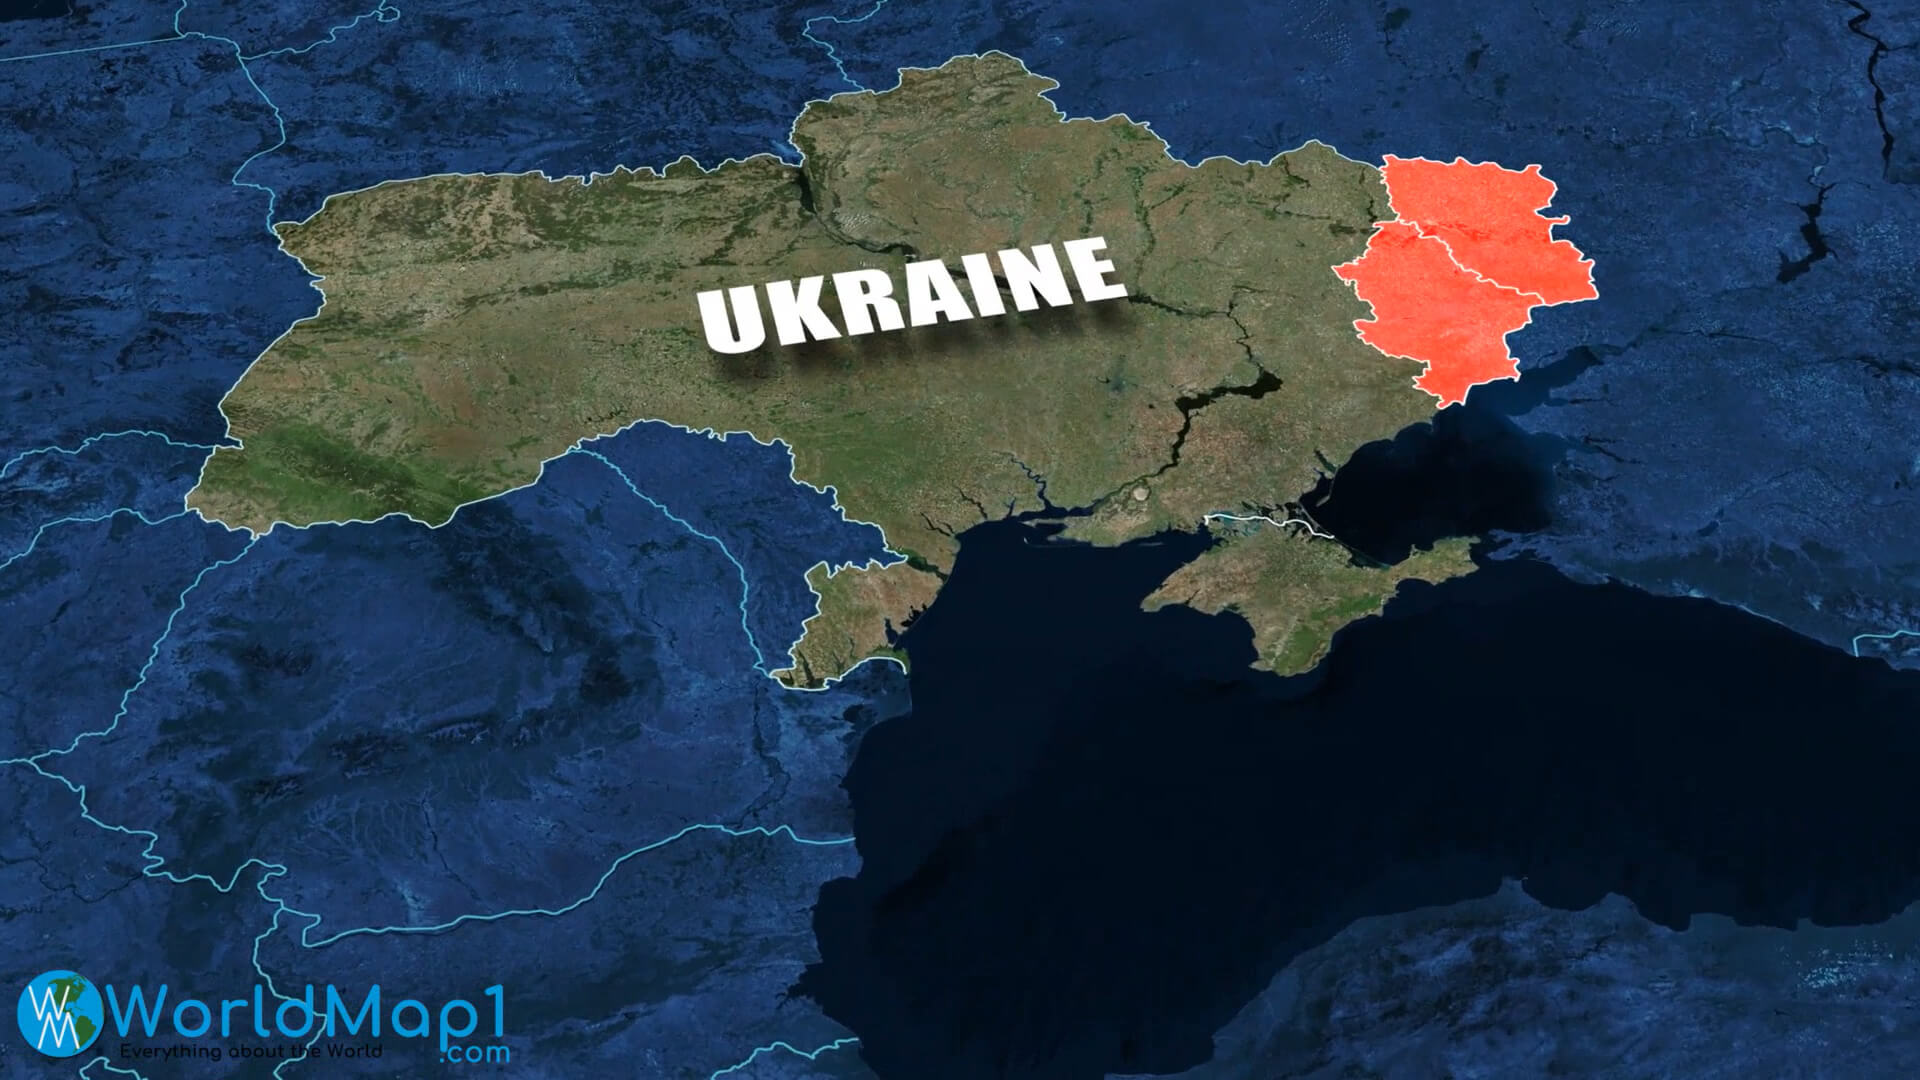 Ukraine and Donbas Map